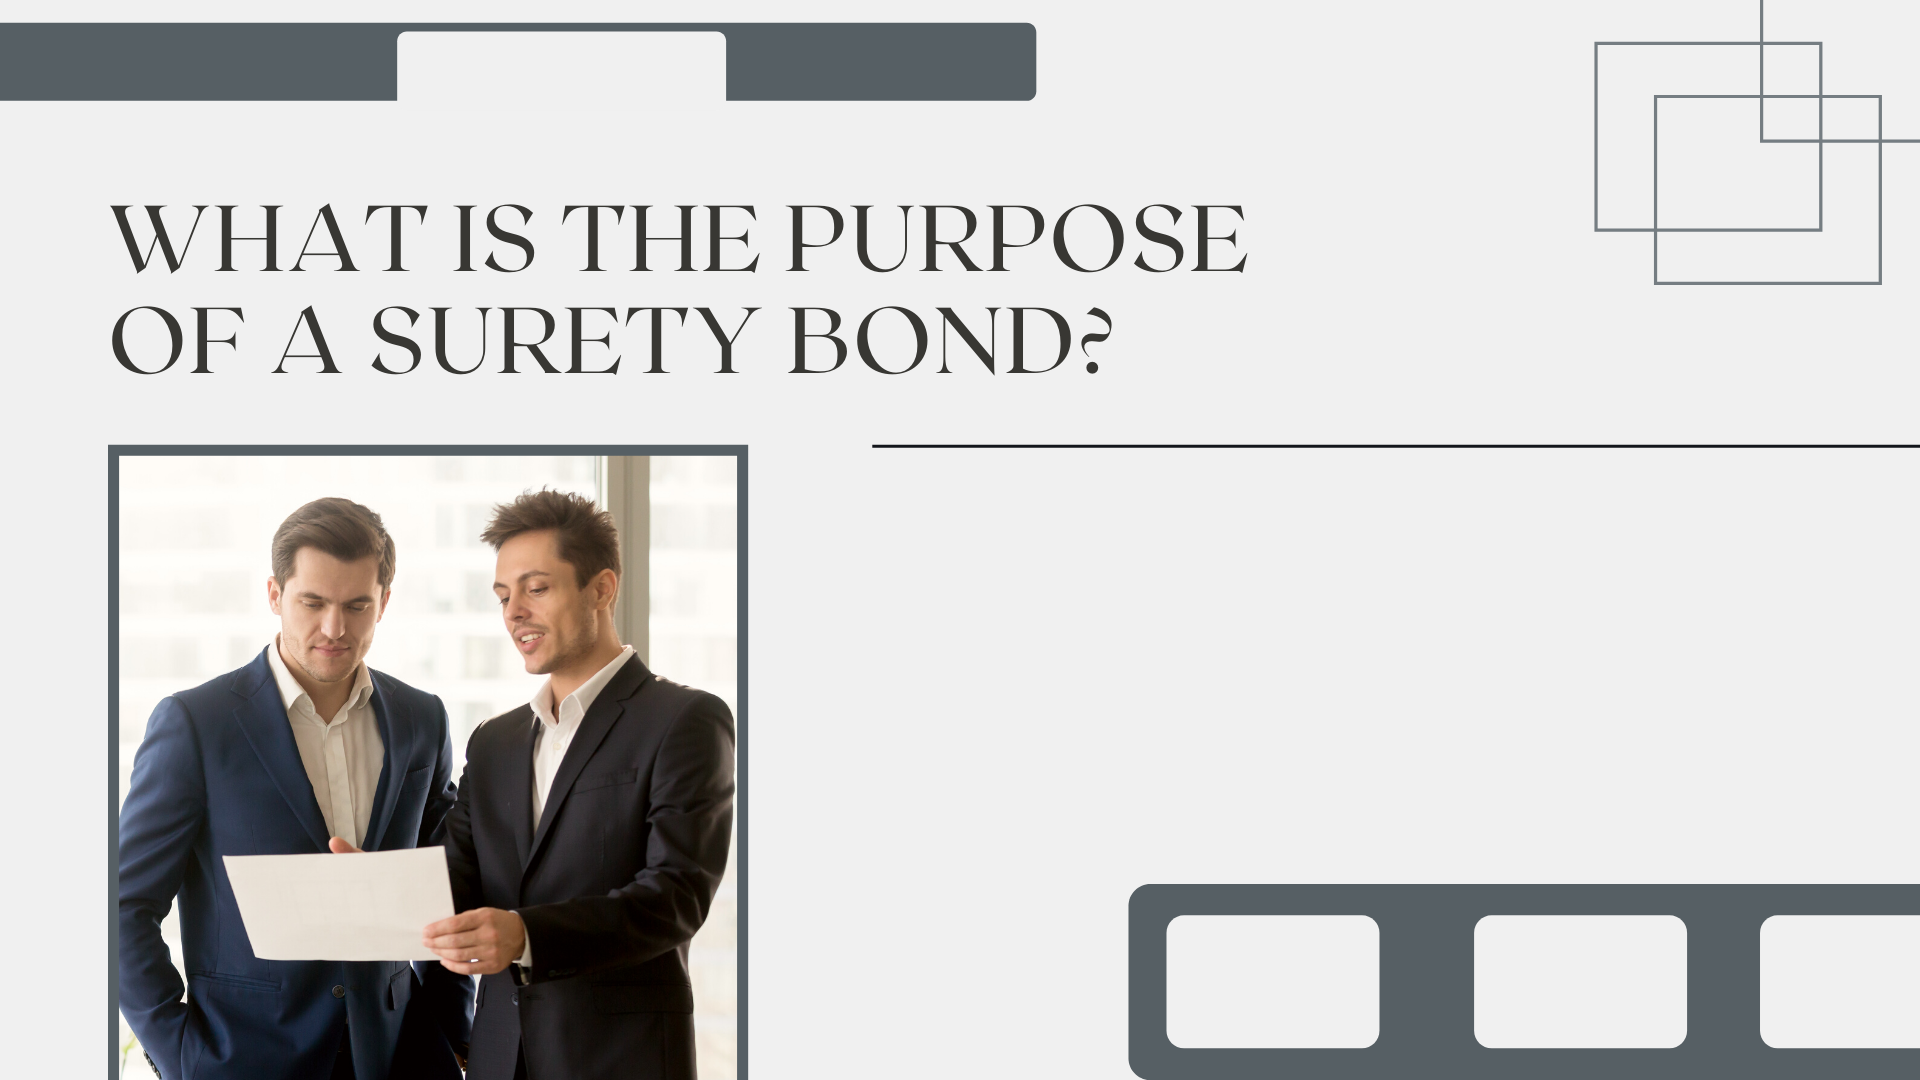 surety bond - What are the types of surety bonds - man presenting